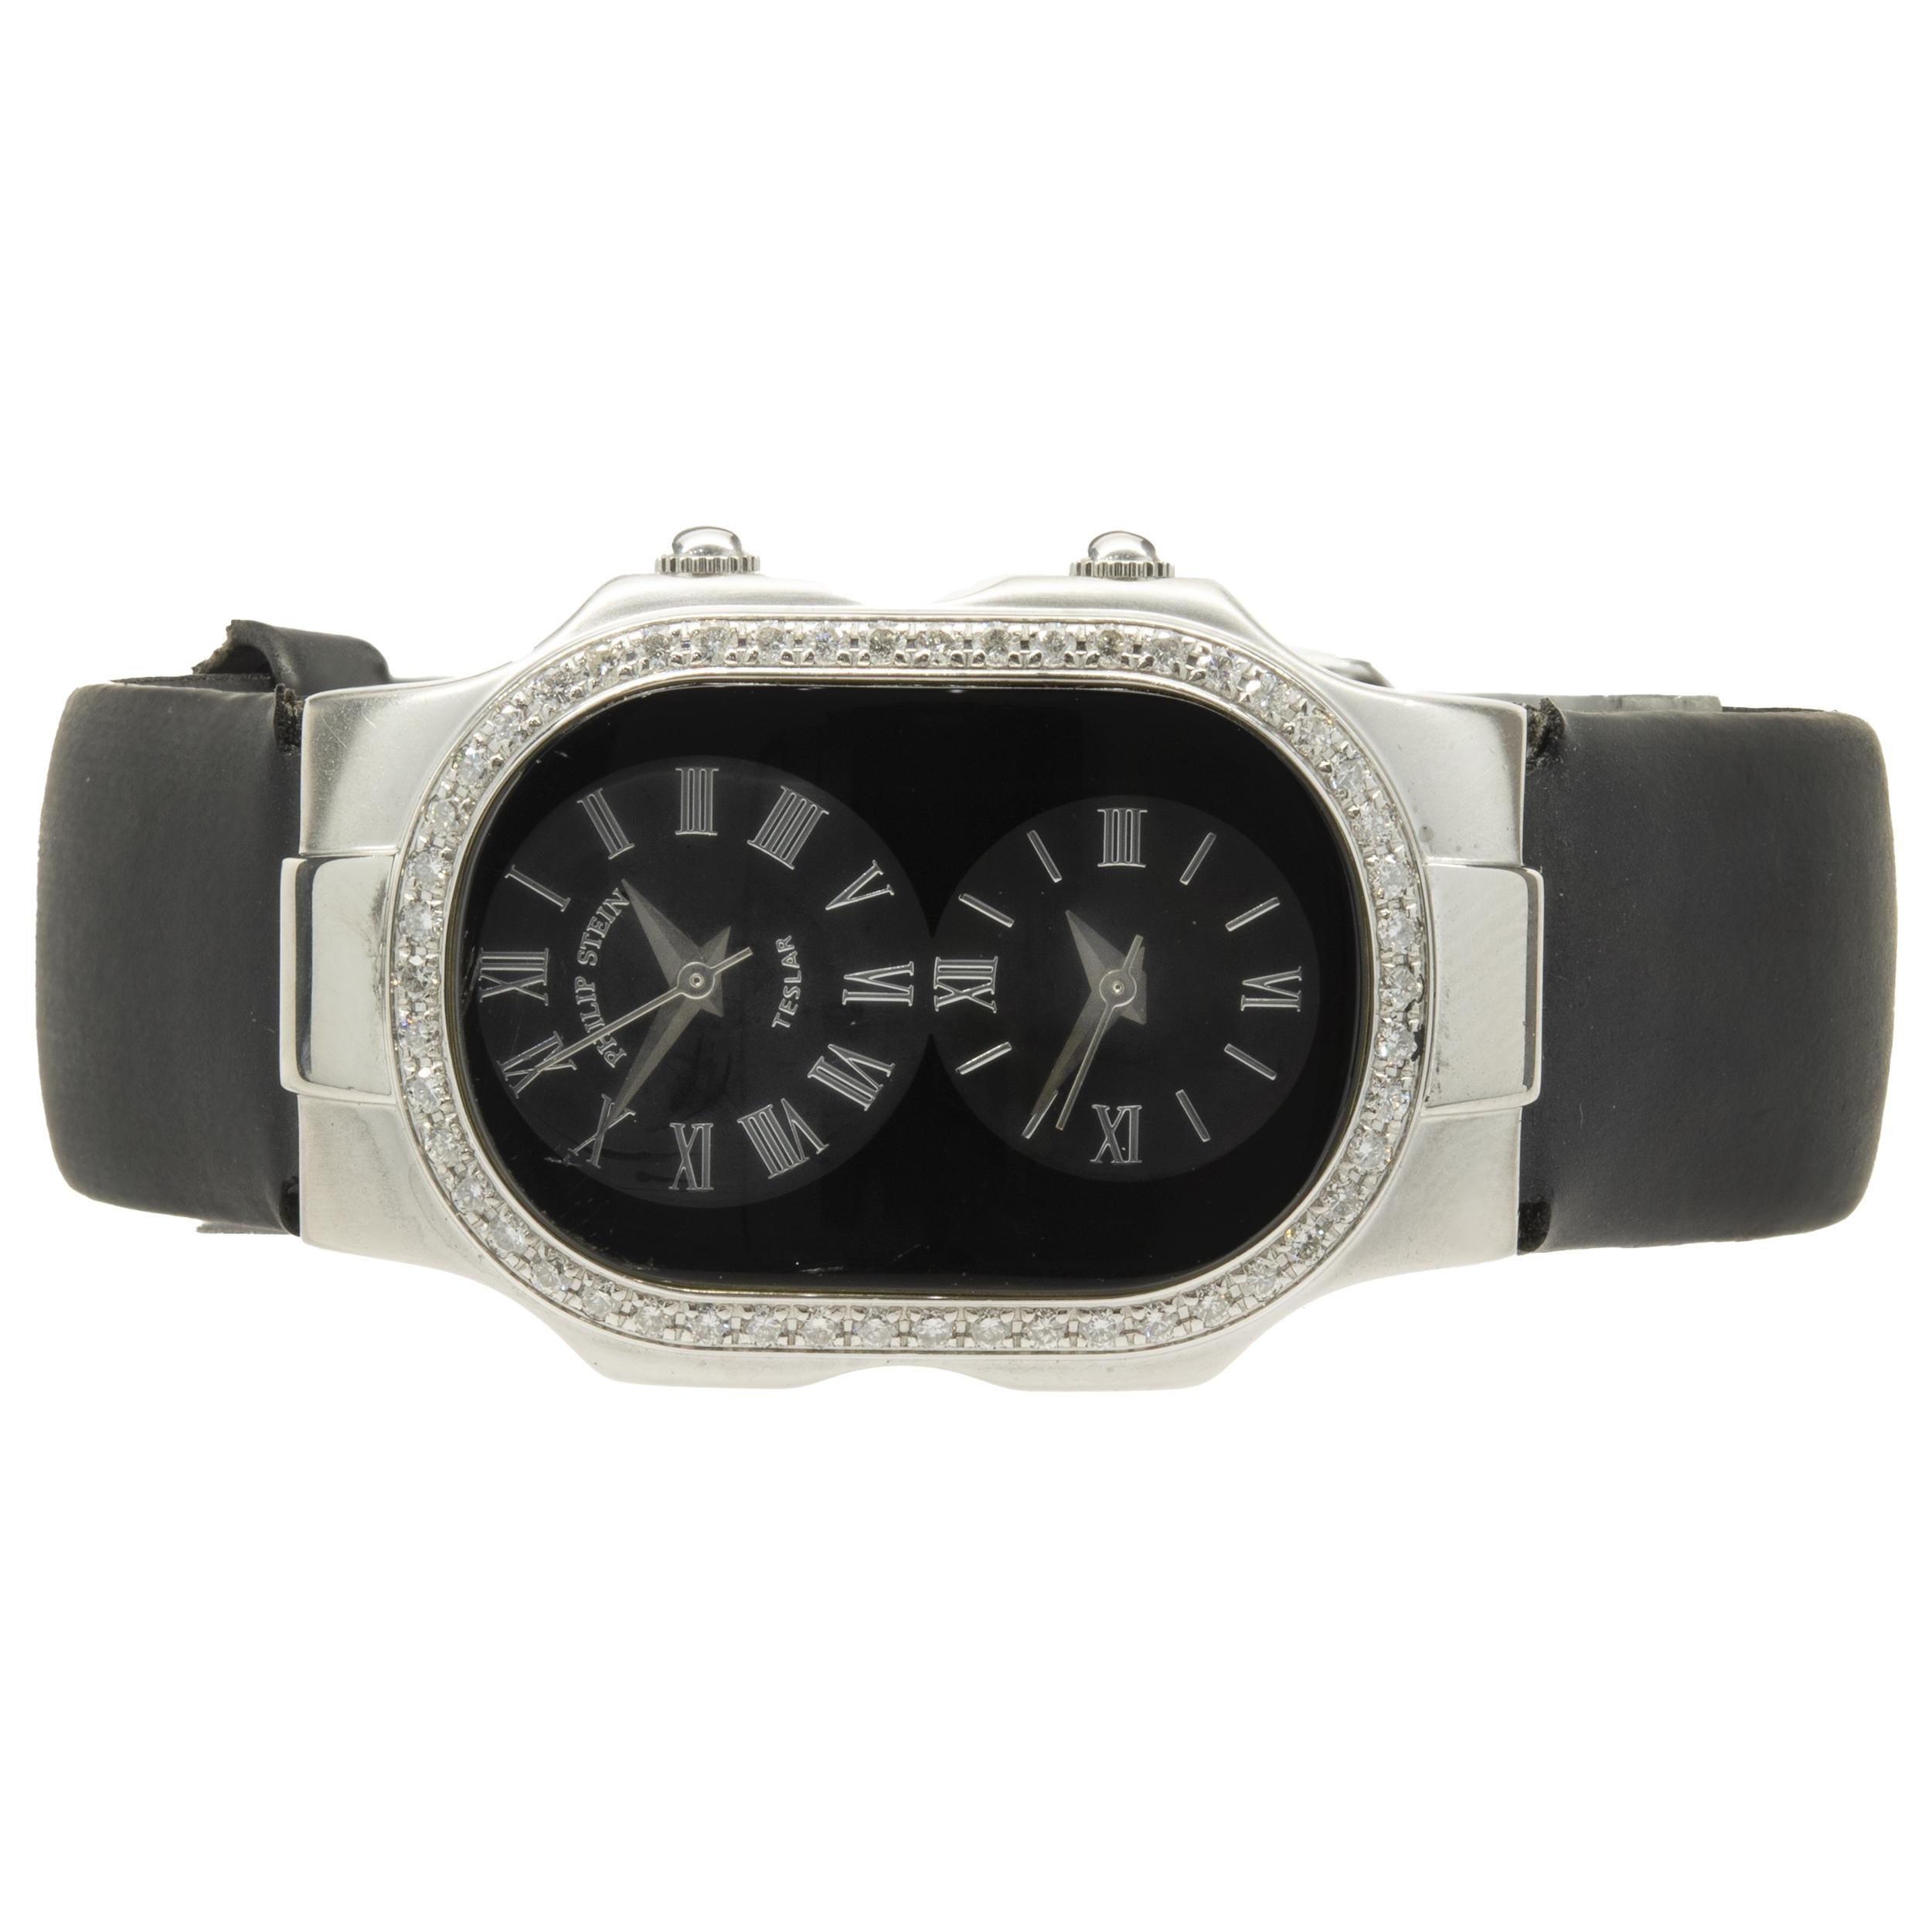 Movement: quartz
Function: hours, minutes, seconds, two-time zone
Case: 42mm x 27mm stainless steel case with sapphire crystal, diamond bezel, stainless steel winding crowns, water resistant to 30 meters
Band: black rubber strap with buckle
Dial: